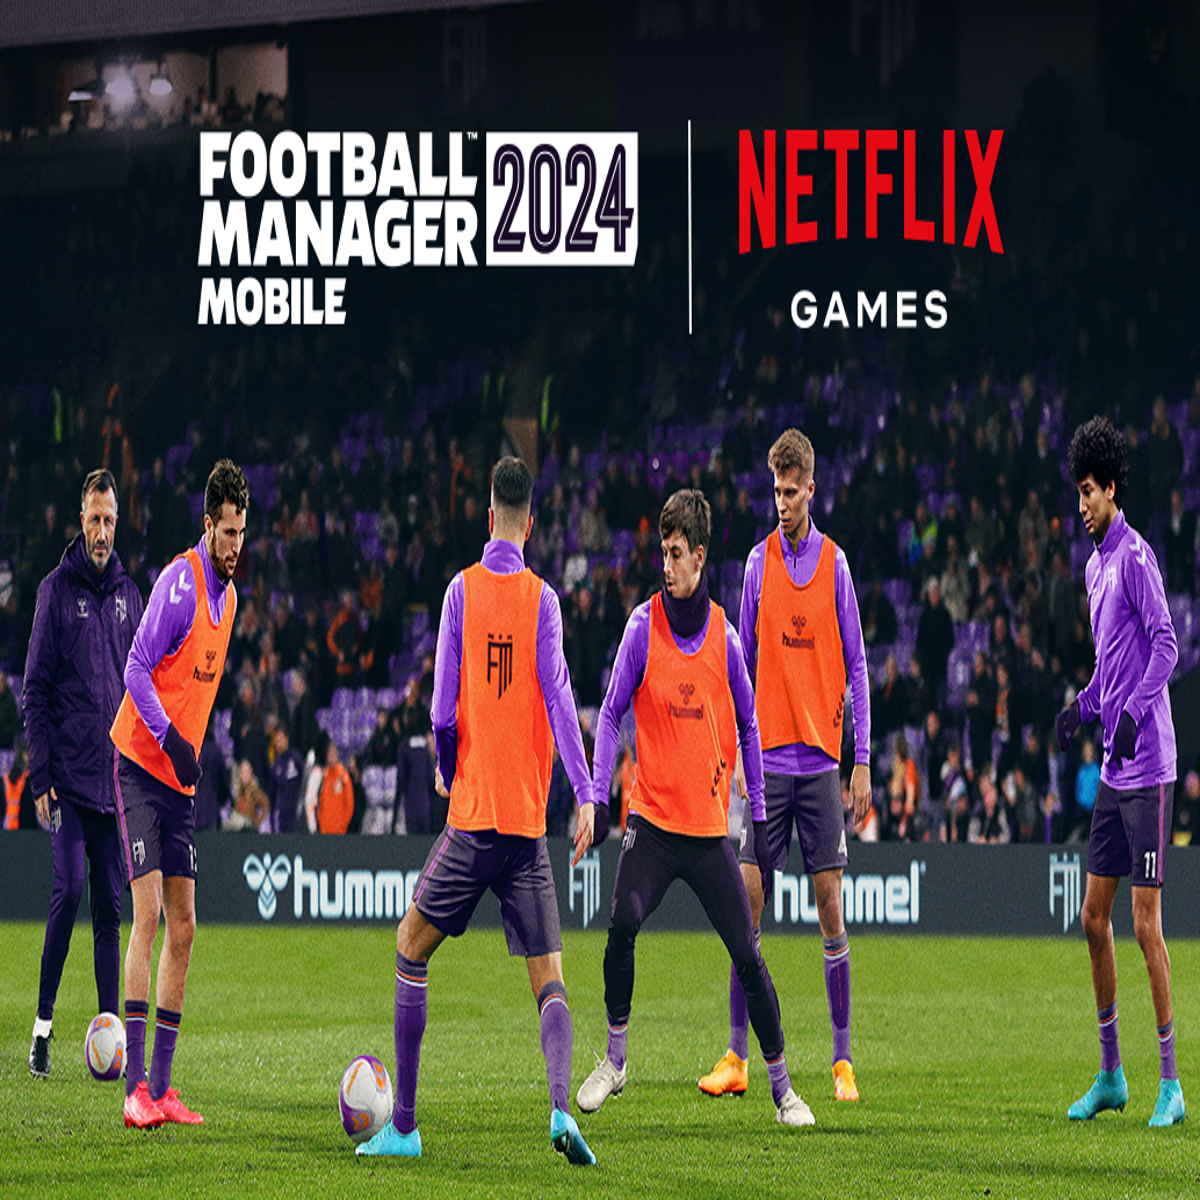 Soccer Manager 2024 - Football - Apps on Google Play